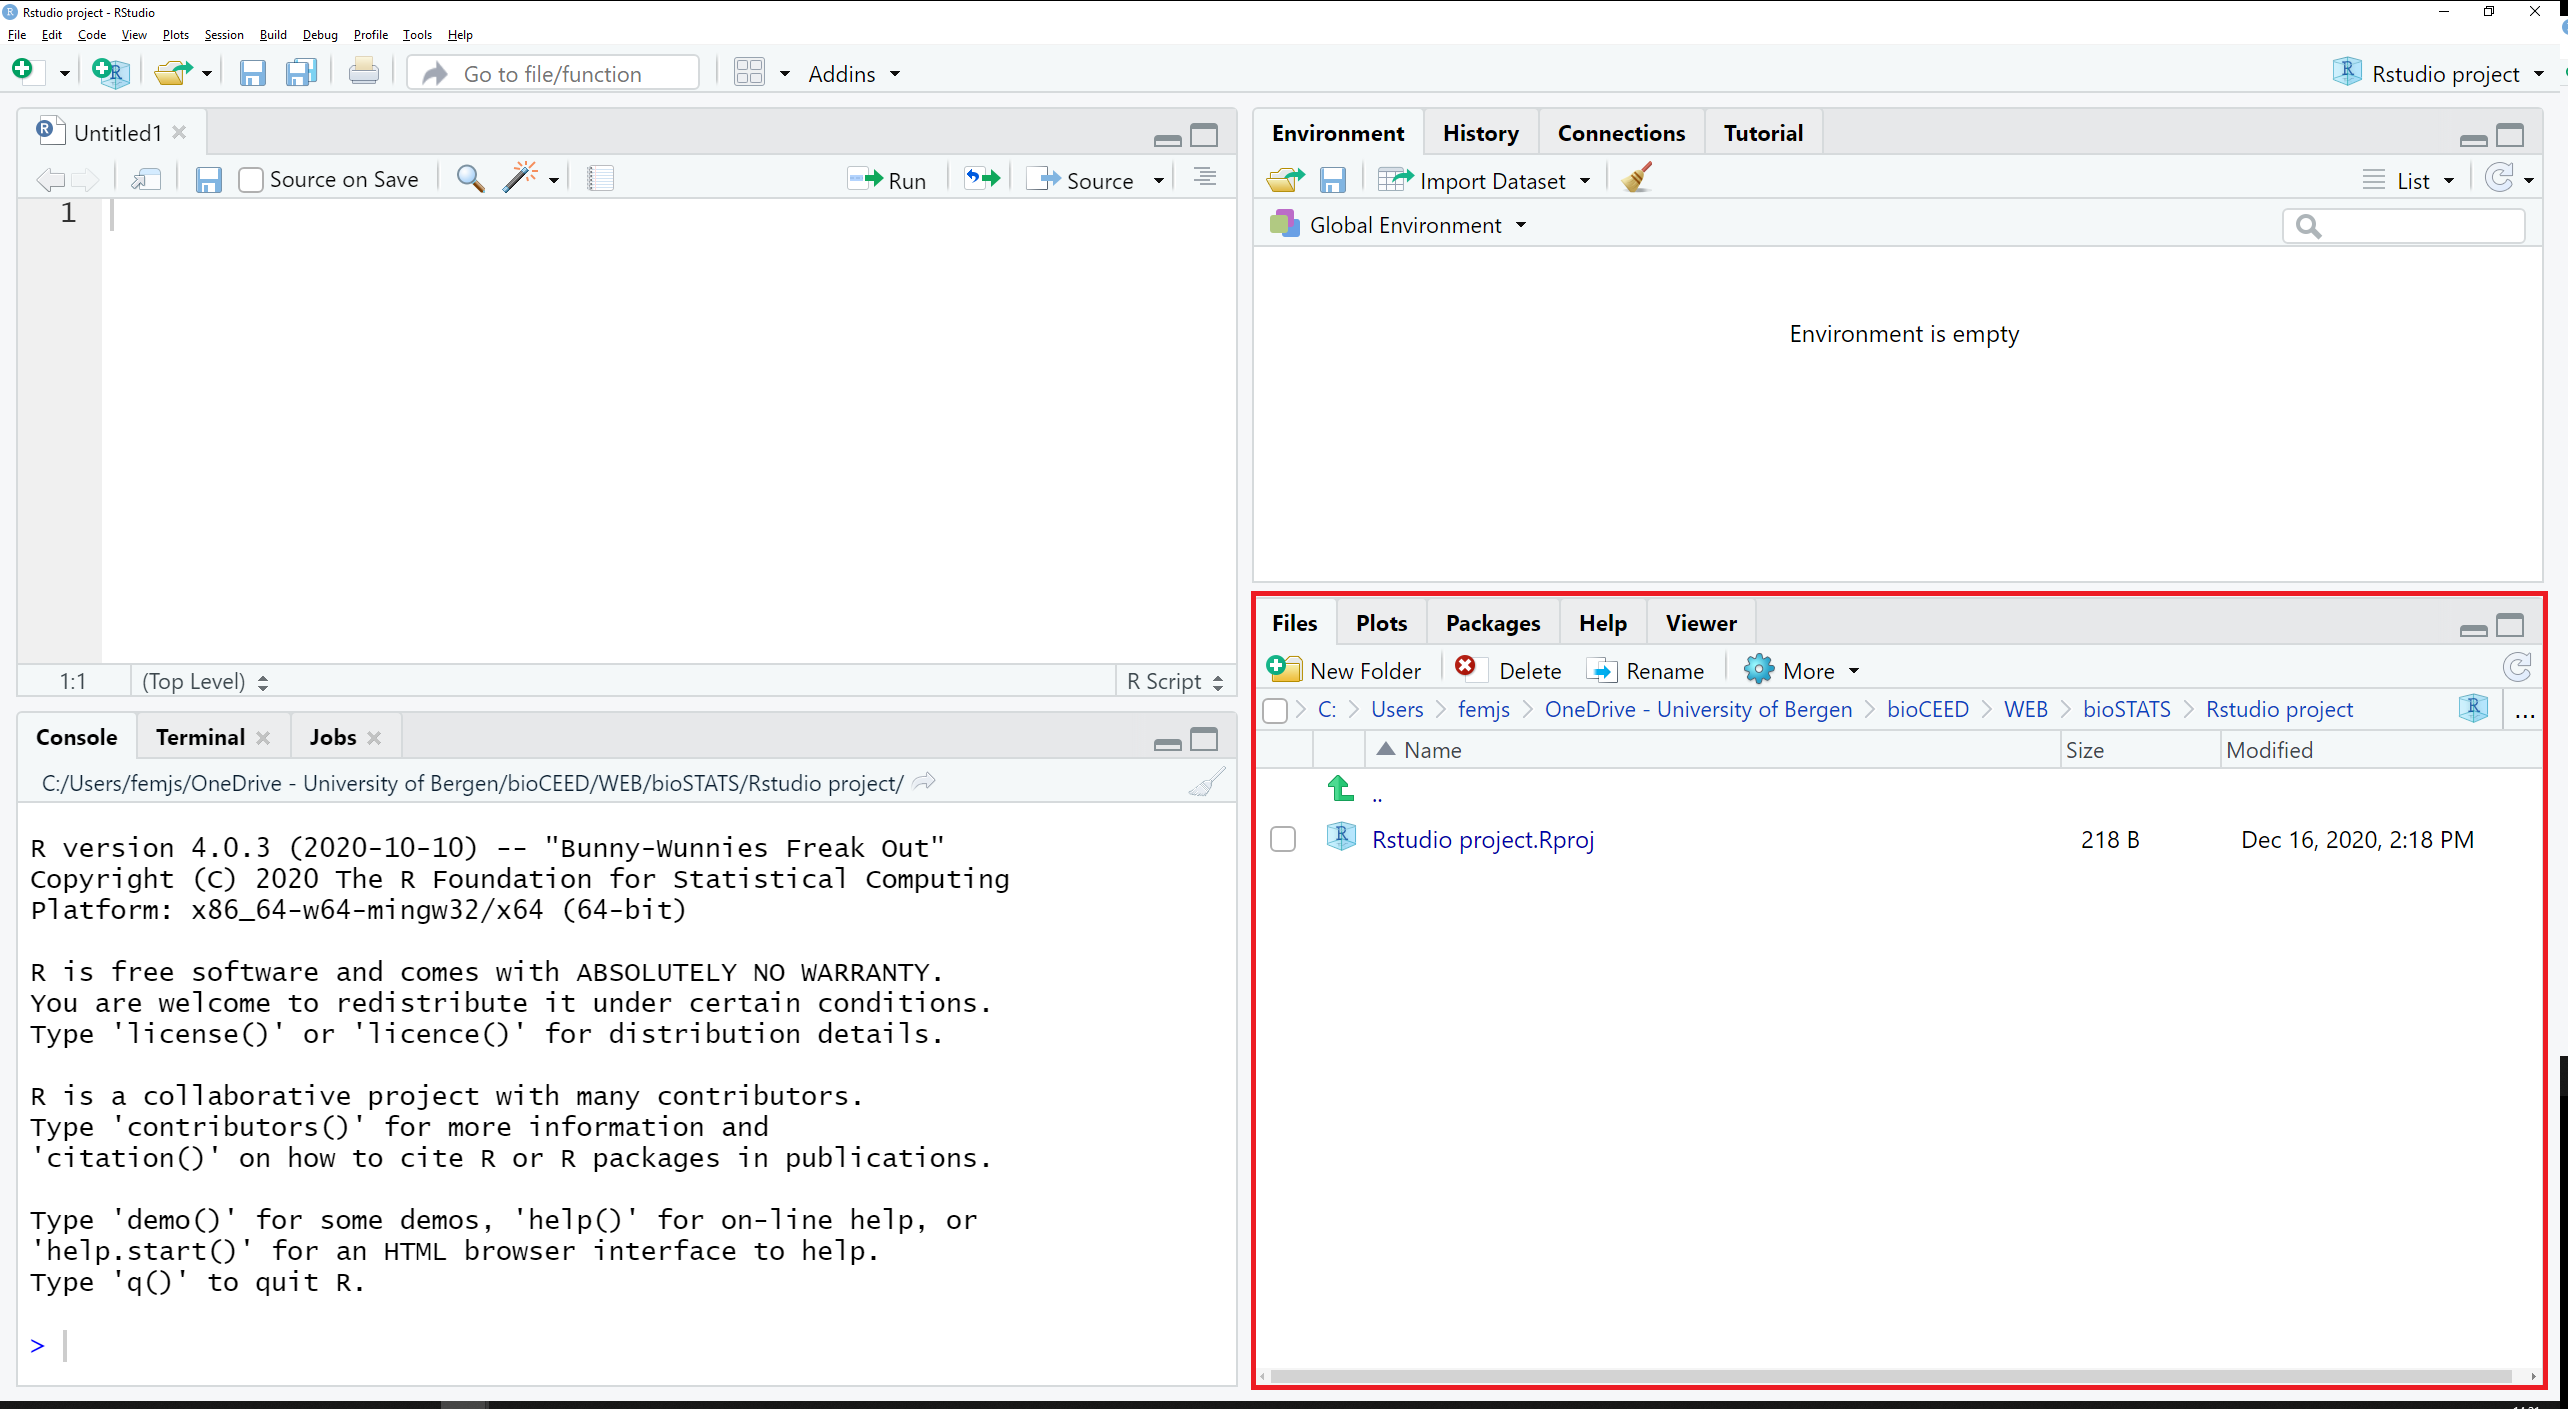 Screenshot of RStudio the location of the Files, Plots and Packages tabs in the bottom right pane.